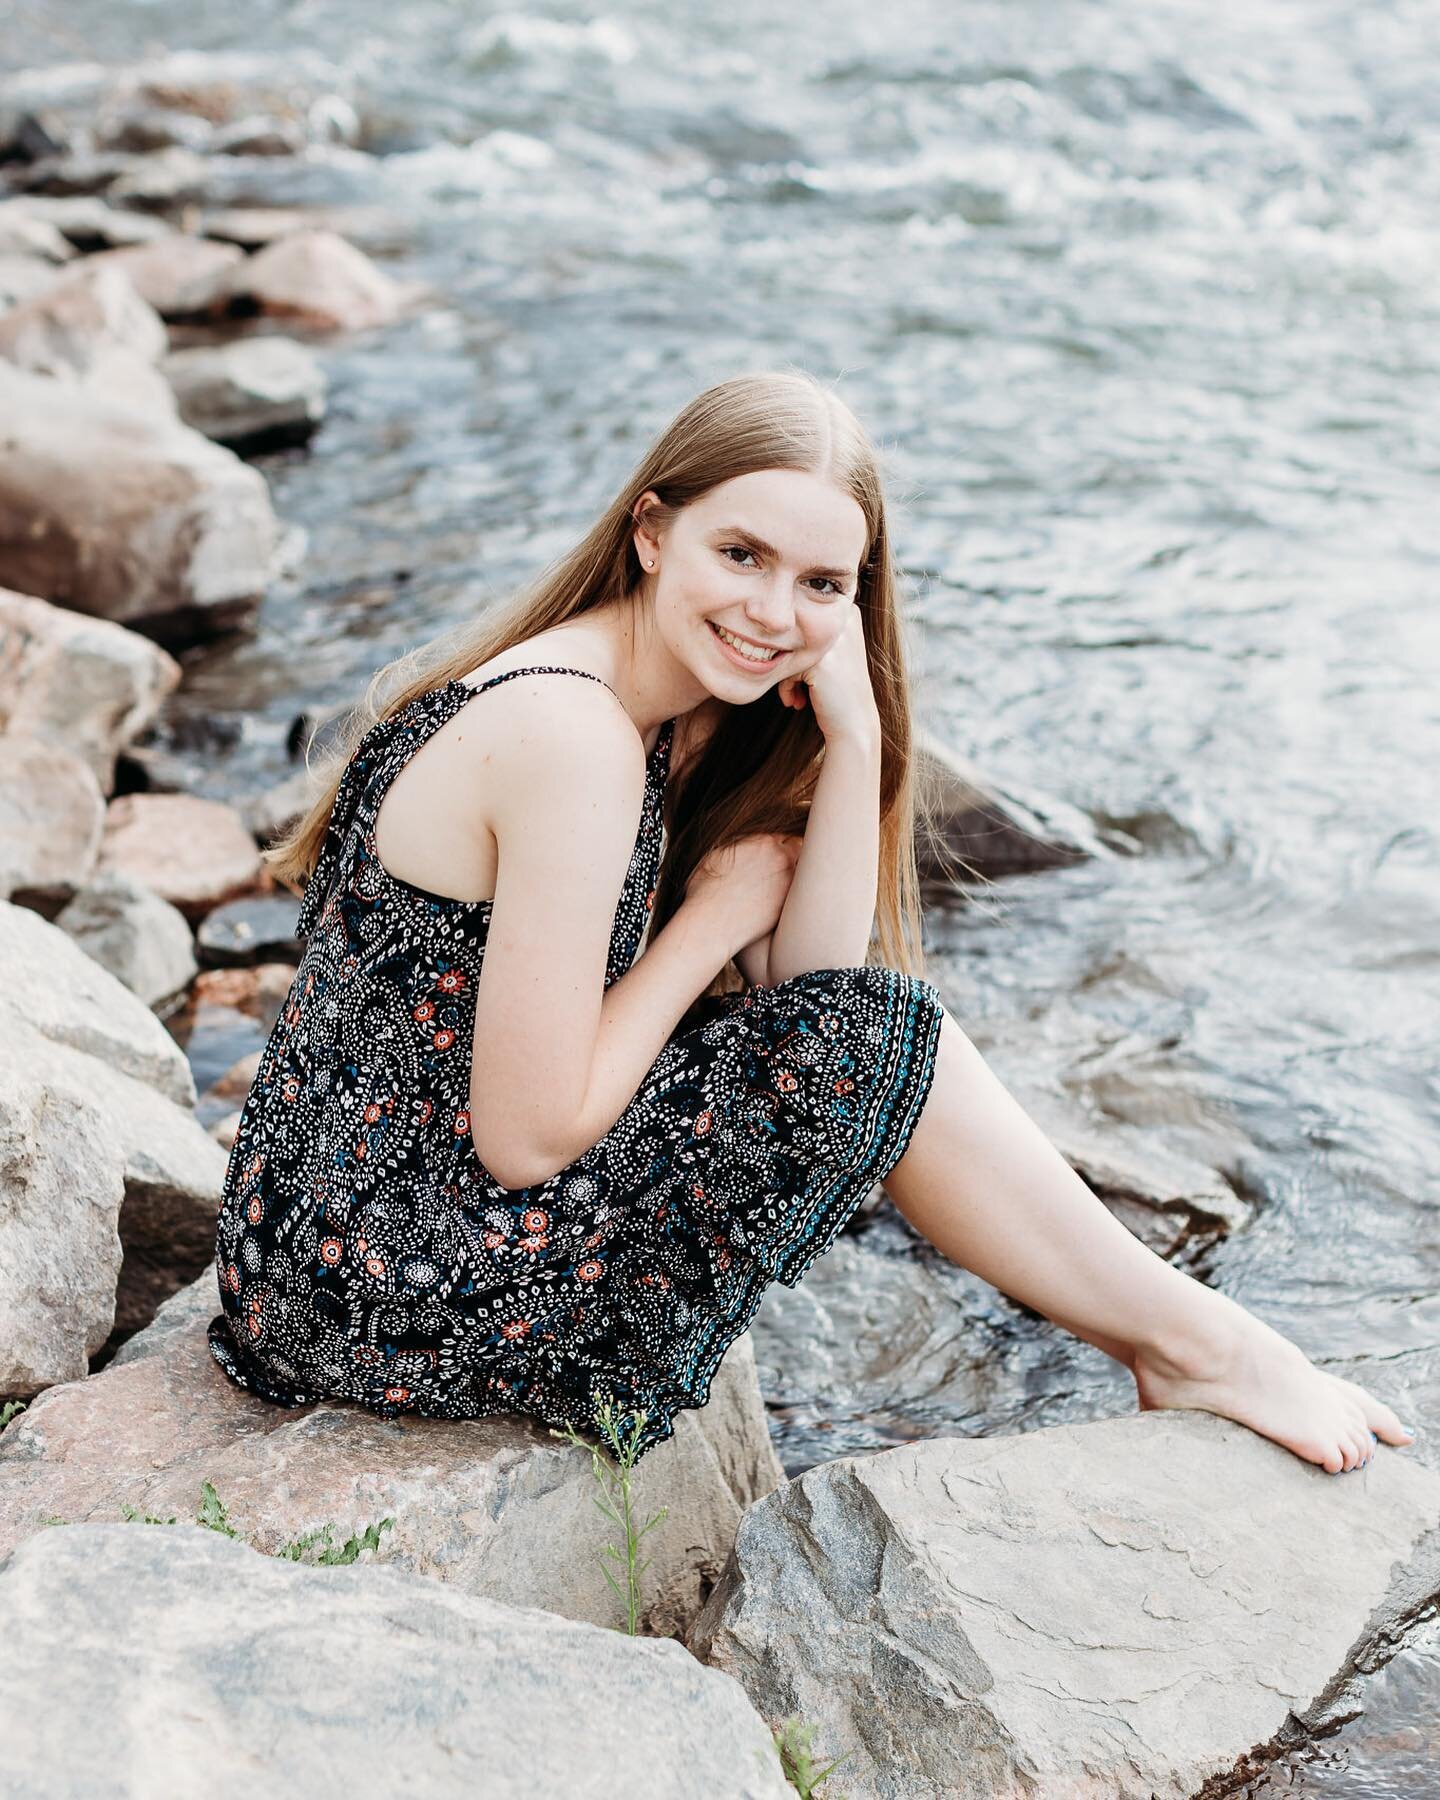 I love locations that give so many different looks in one place! @_annikaaaj9 your senior session was beautiful!!

I hope you have an amazing year at @highlandsranchhs!

#highlandsranchseniorphotographer #highlandsranch #denverseniorphotographer #sen